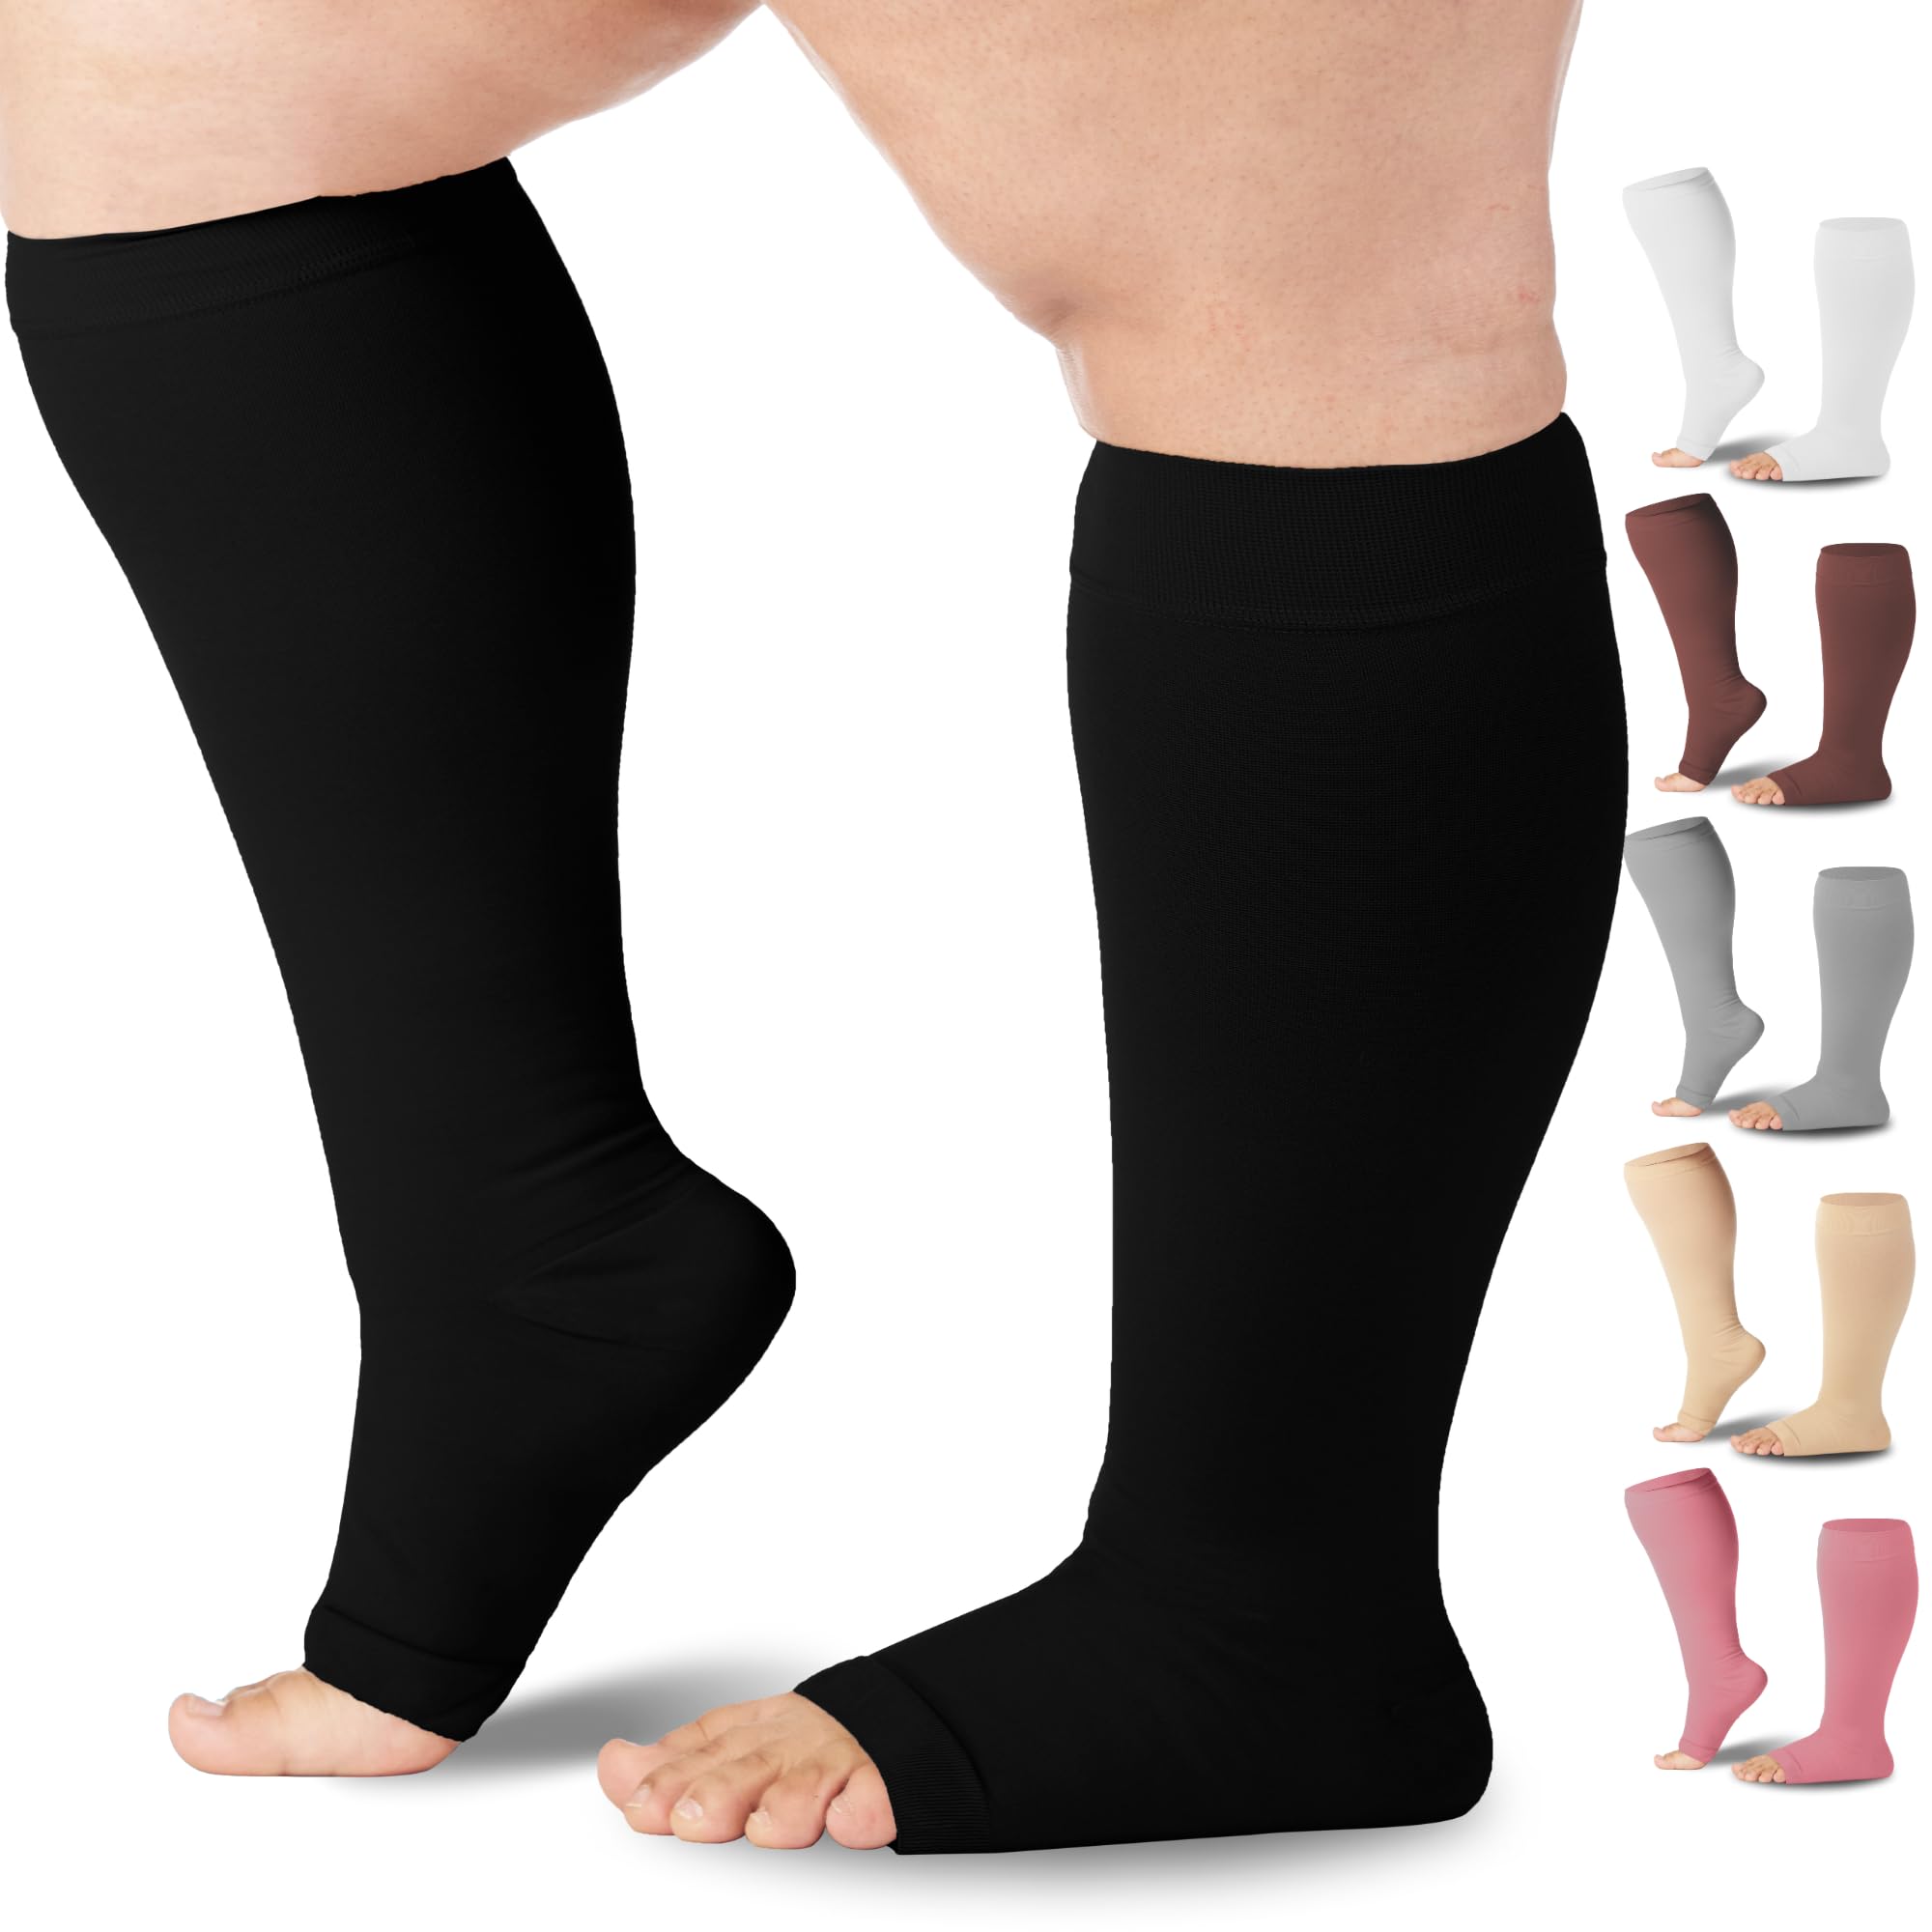 Mojo Compression Socks 7XL Bariatric Extra Wide Calf Plus Size Ankle Support Hose, Open Toe 20-30mmHg, Black - Ideal for Varicos